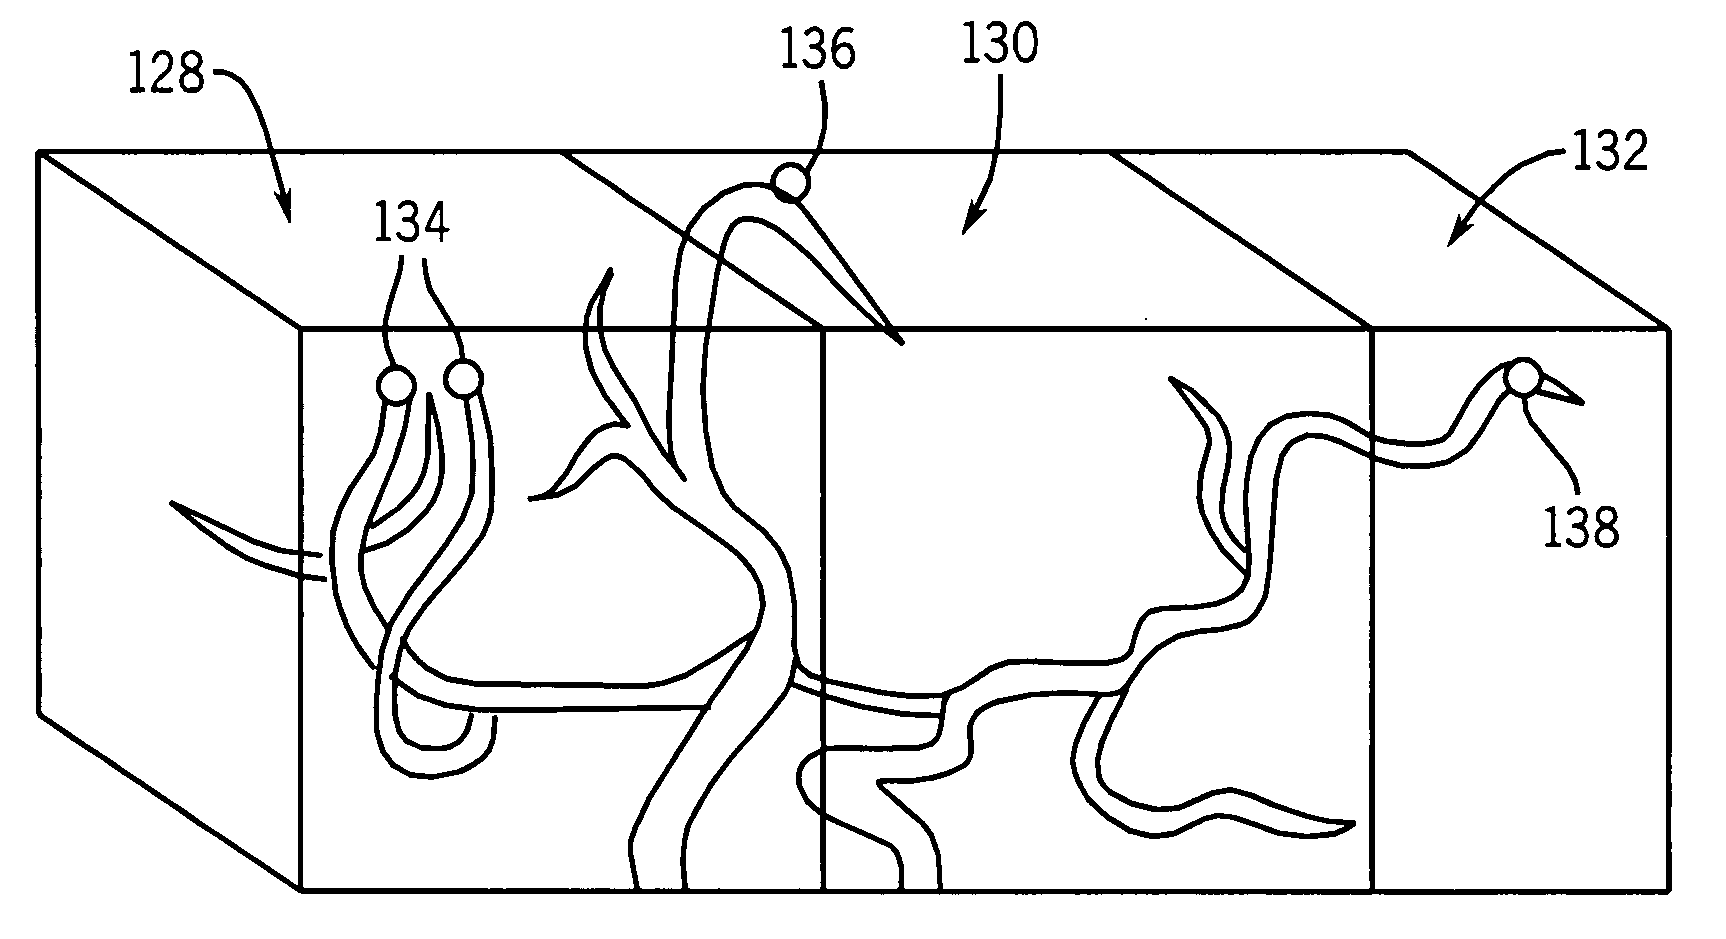 Vascular image extraction and labeling system and method